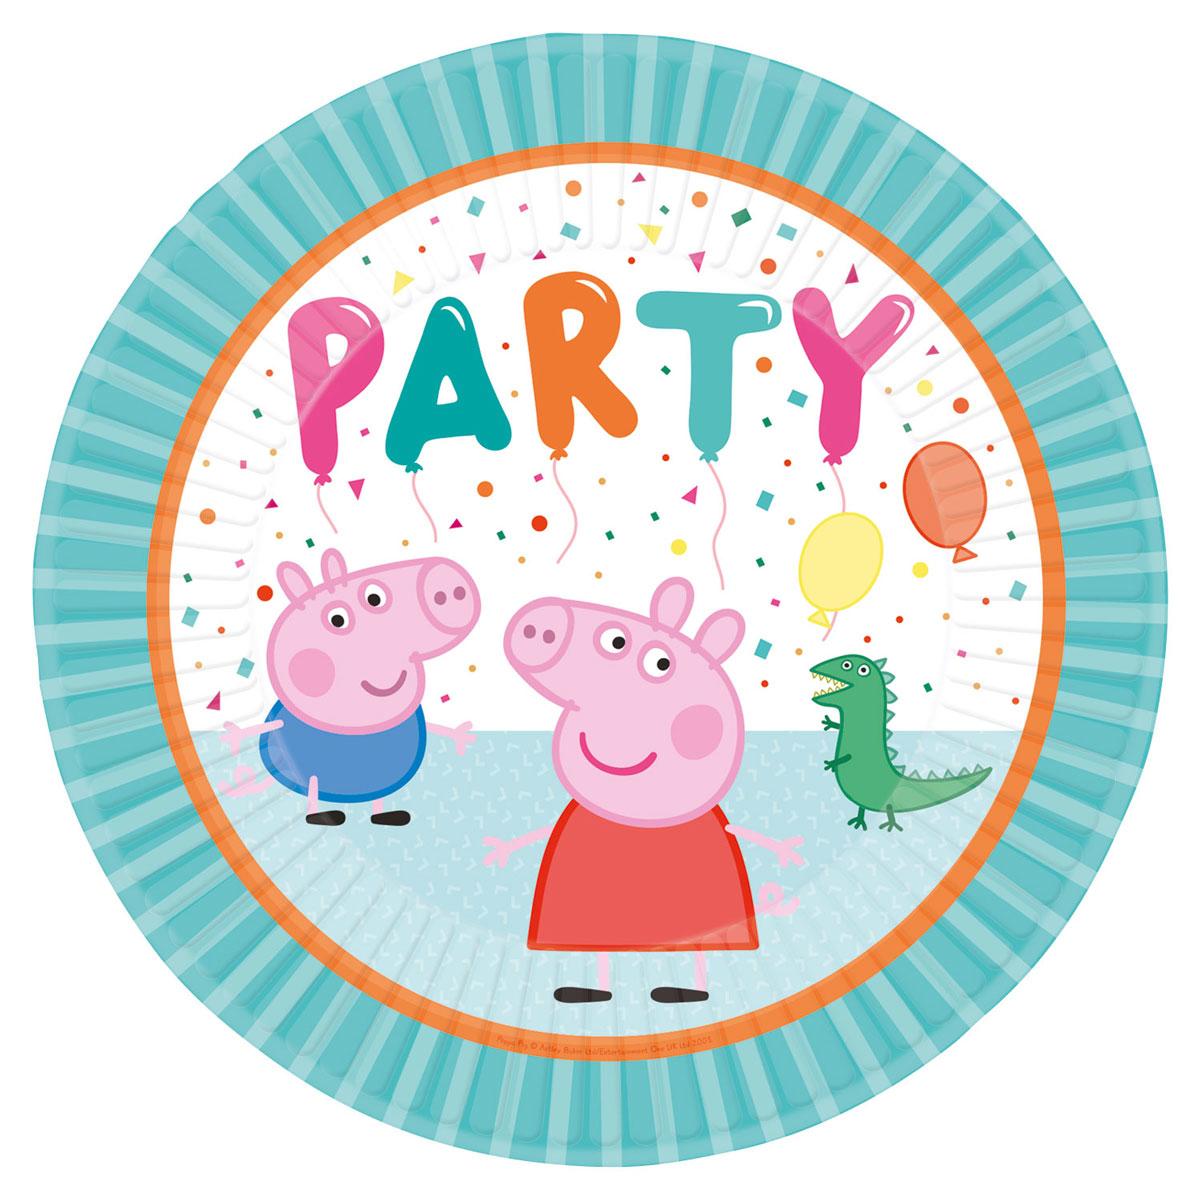 Pack 8 Peppa Pig Paper Party Plates 23cm by Amscan 906329 available here at Karnival Costumes online party shop